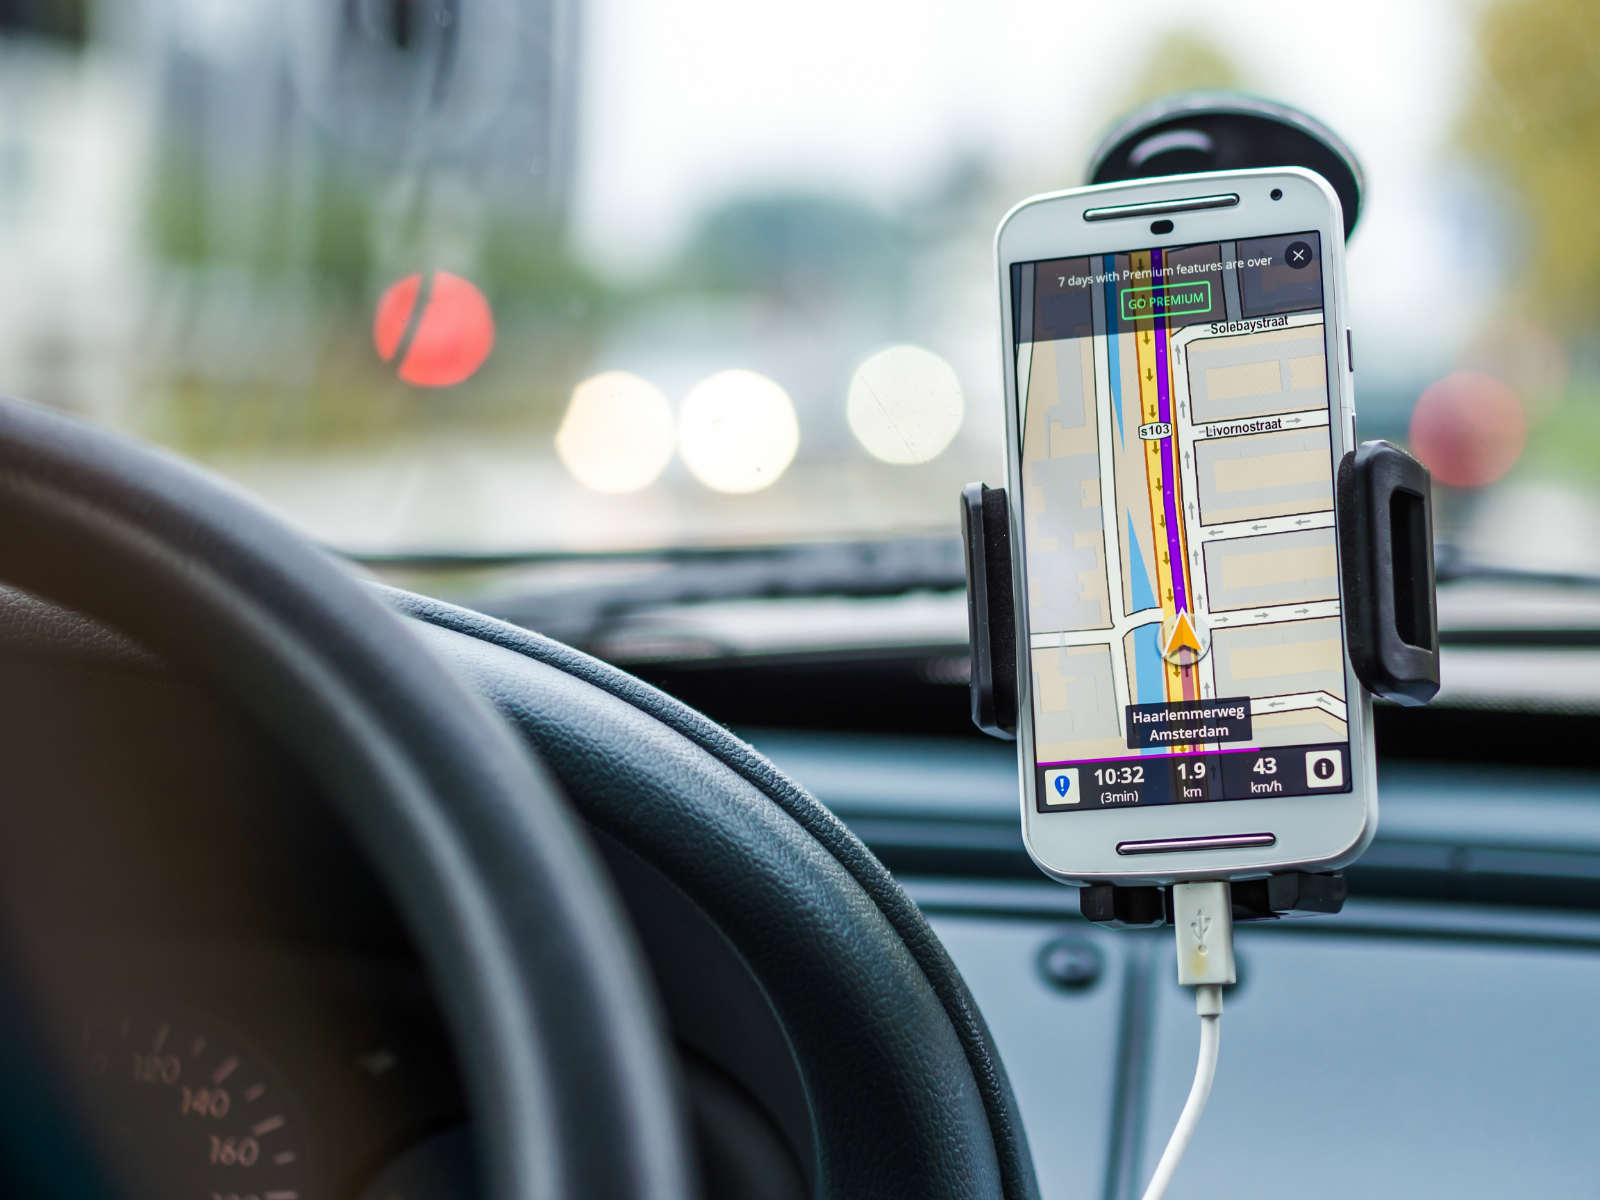 The 8 Best Cell Phone Holders for Car in 2020 - ESR Blog